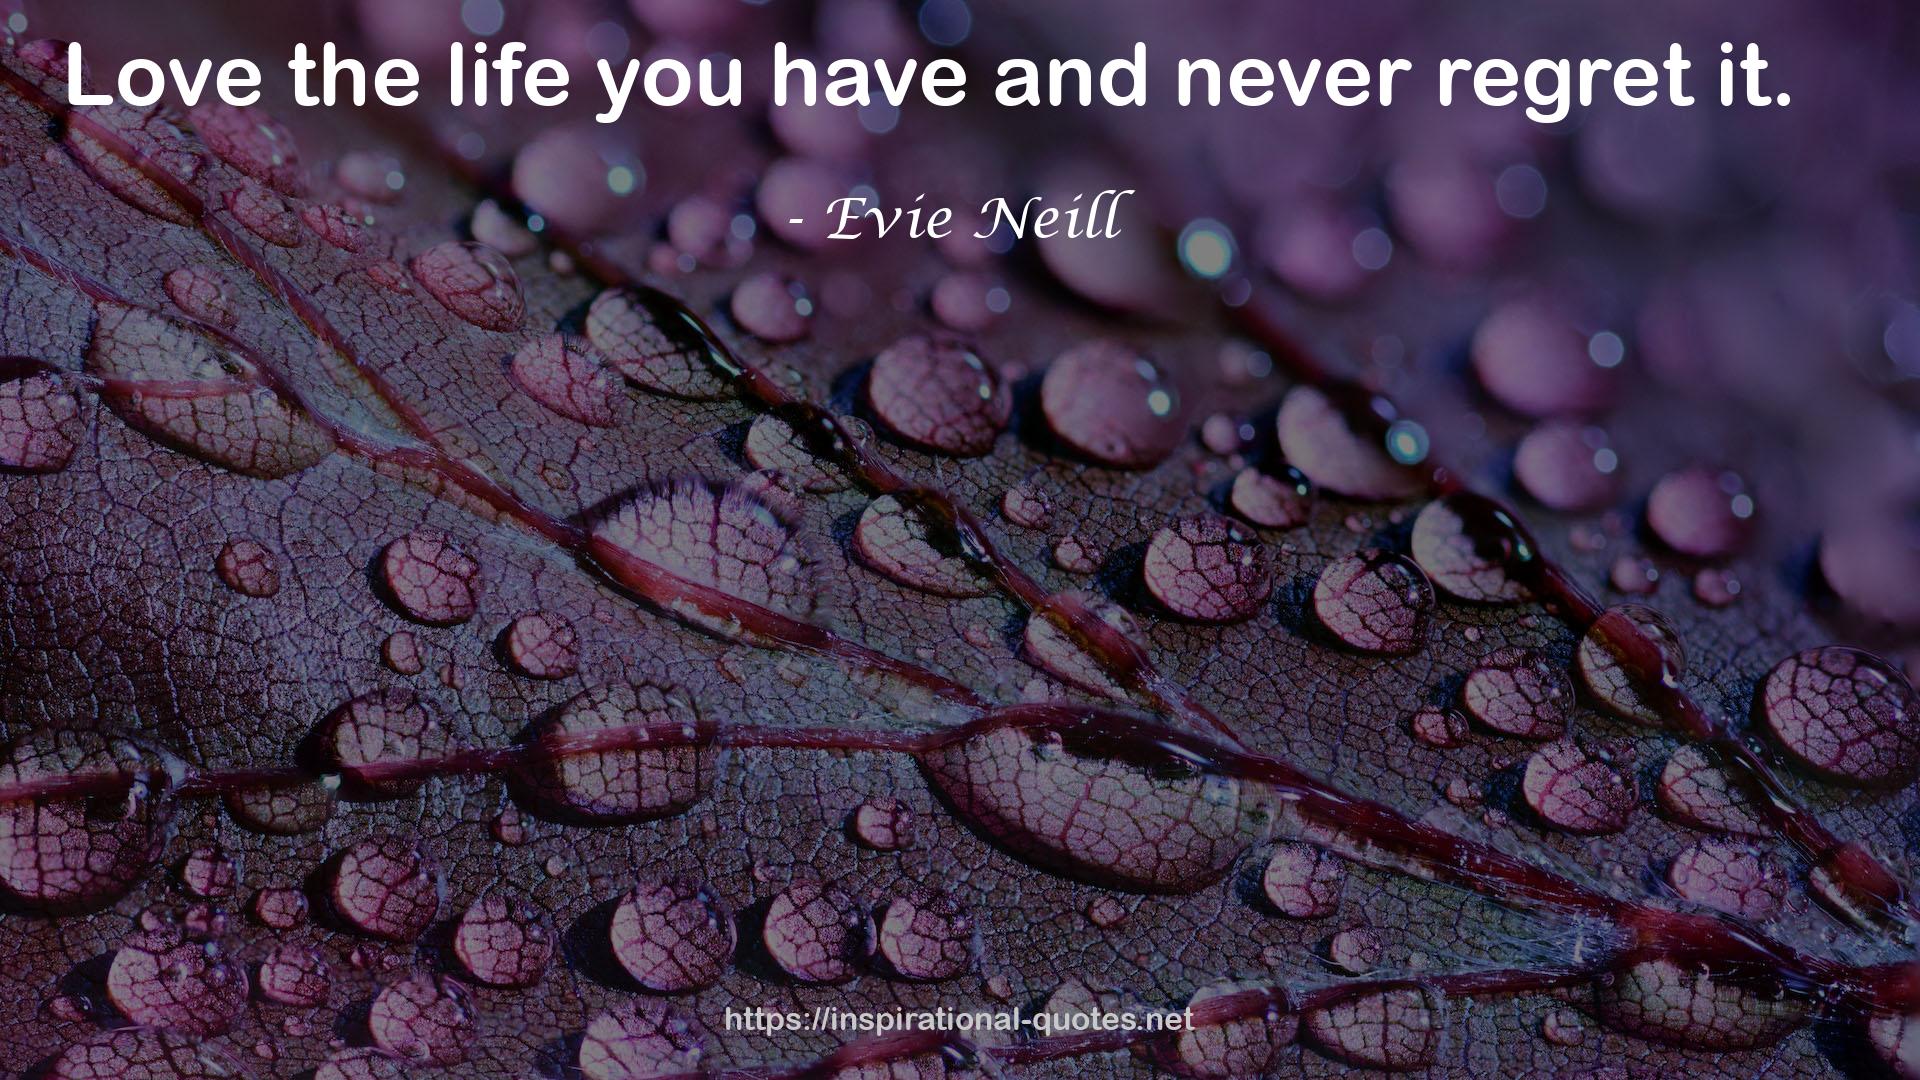 Evie Neill QUOTES